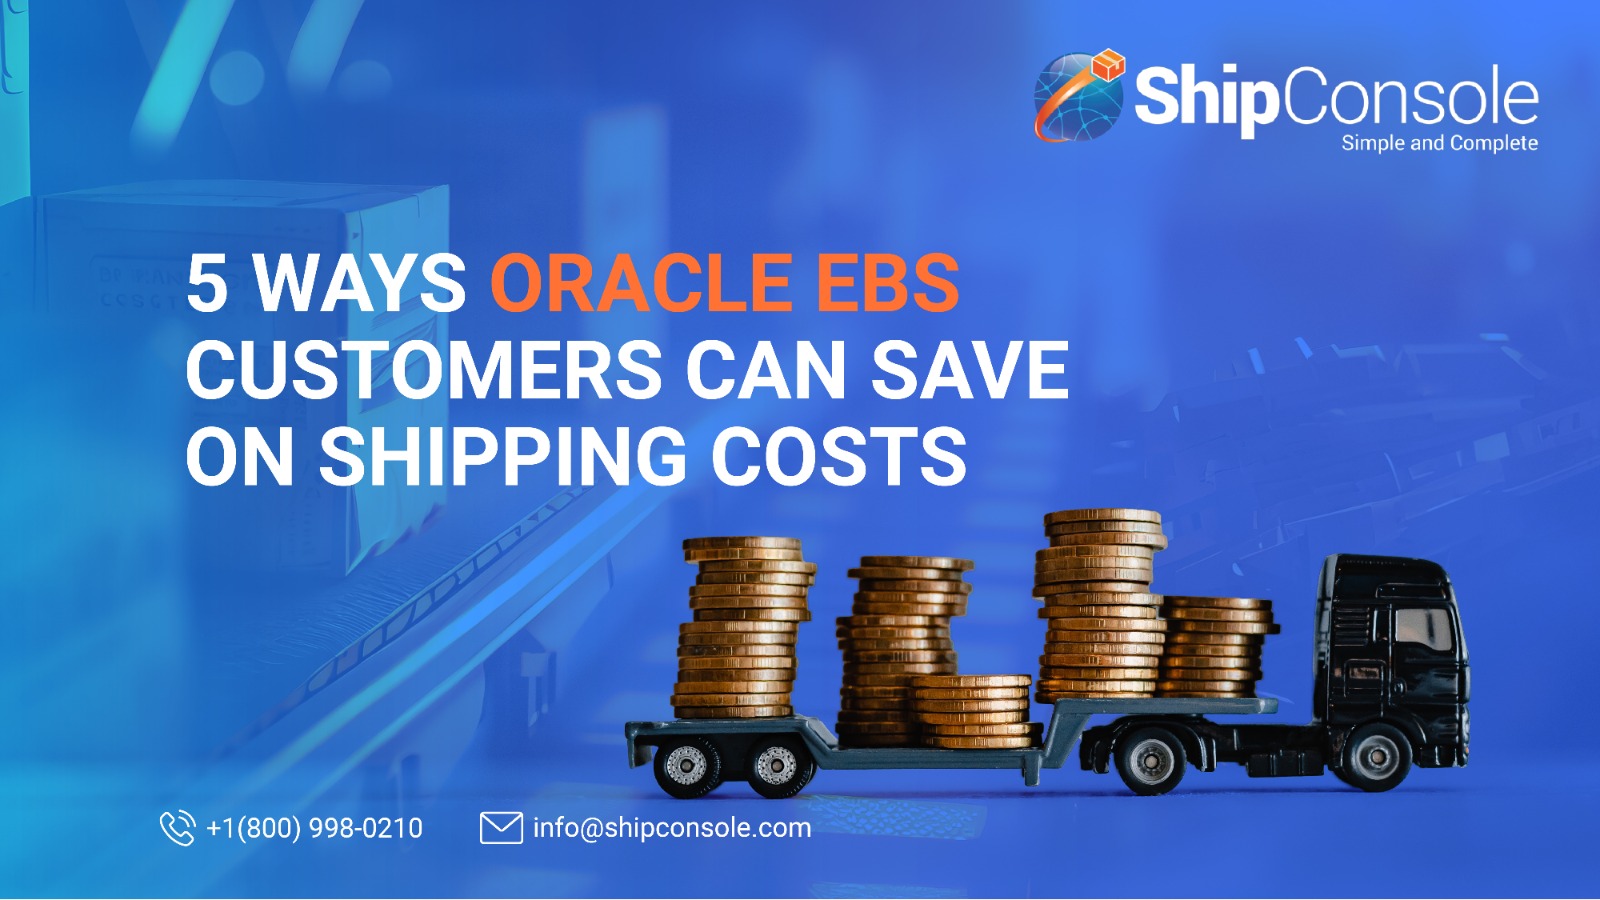 5 Ways Oracle EBS Customers can save on Shipping Costs